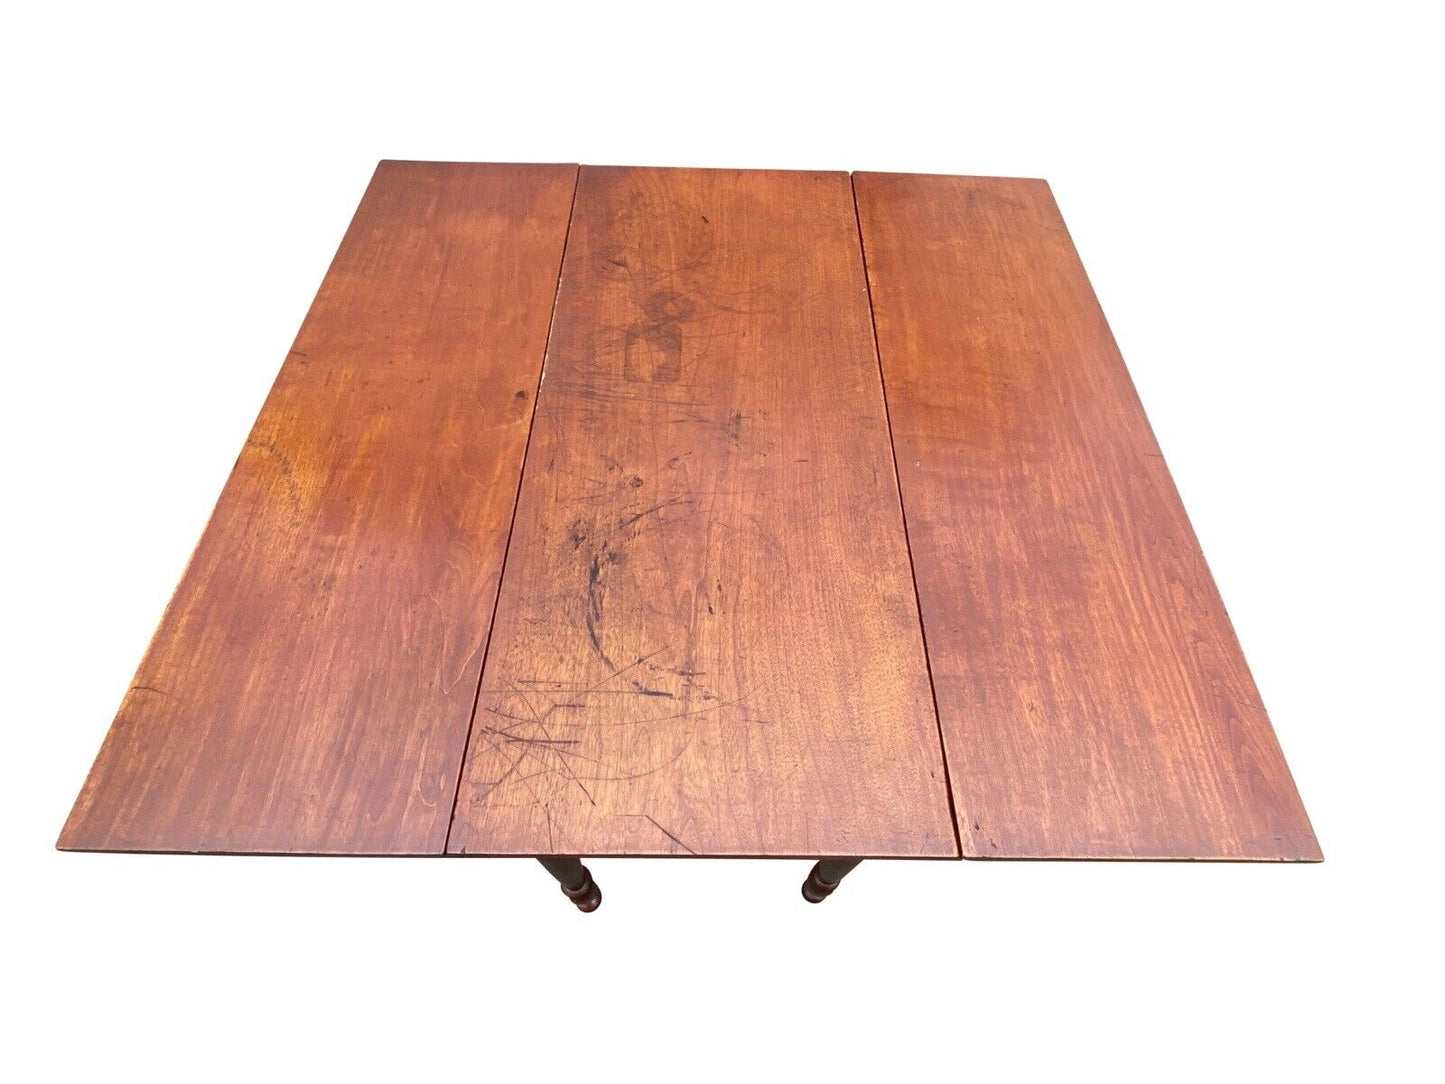 Antique New England Cherry Drop Leaf Dining Table / Farmhouse Table